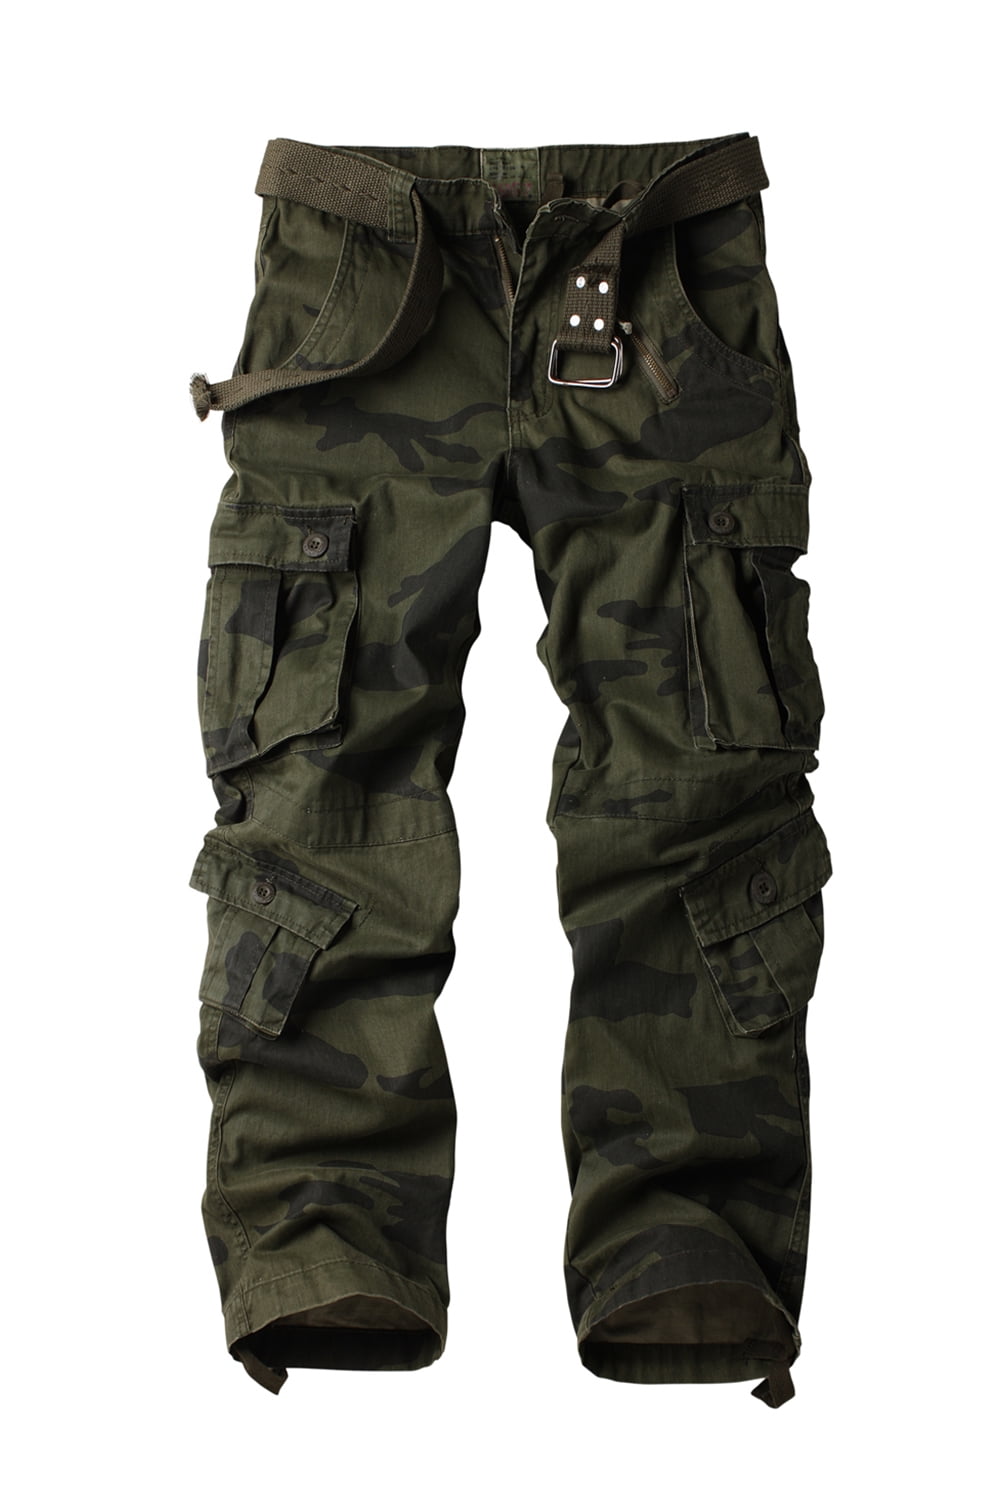 TRGPSG Men's Camo Cargo Pants with 8 Pockets Relaxed Fit Cotton ...